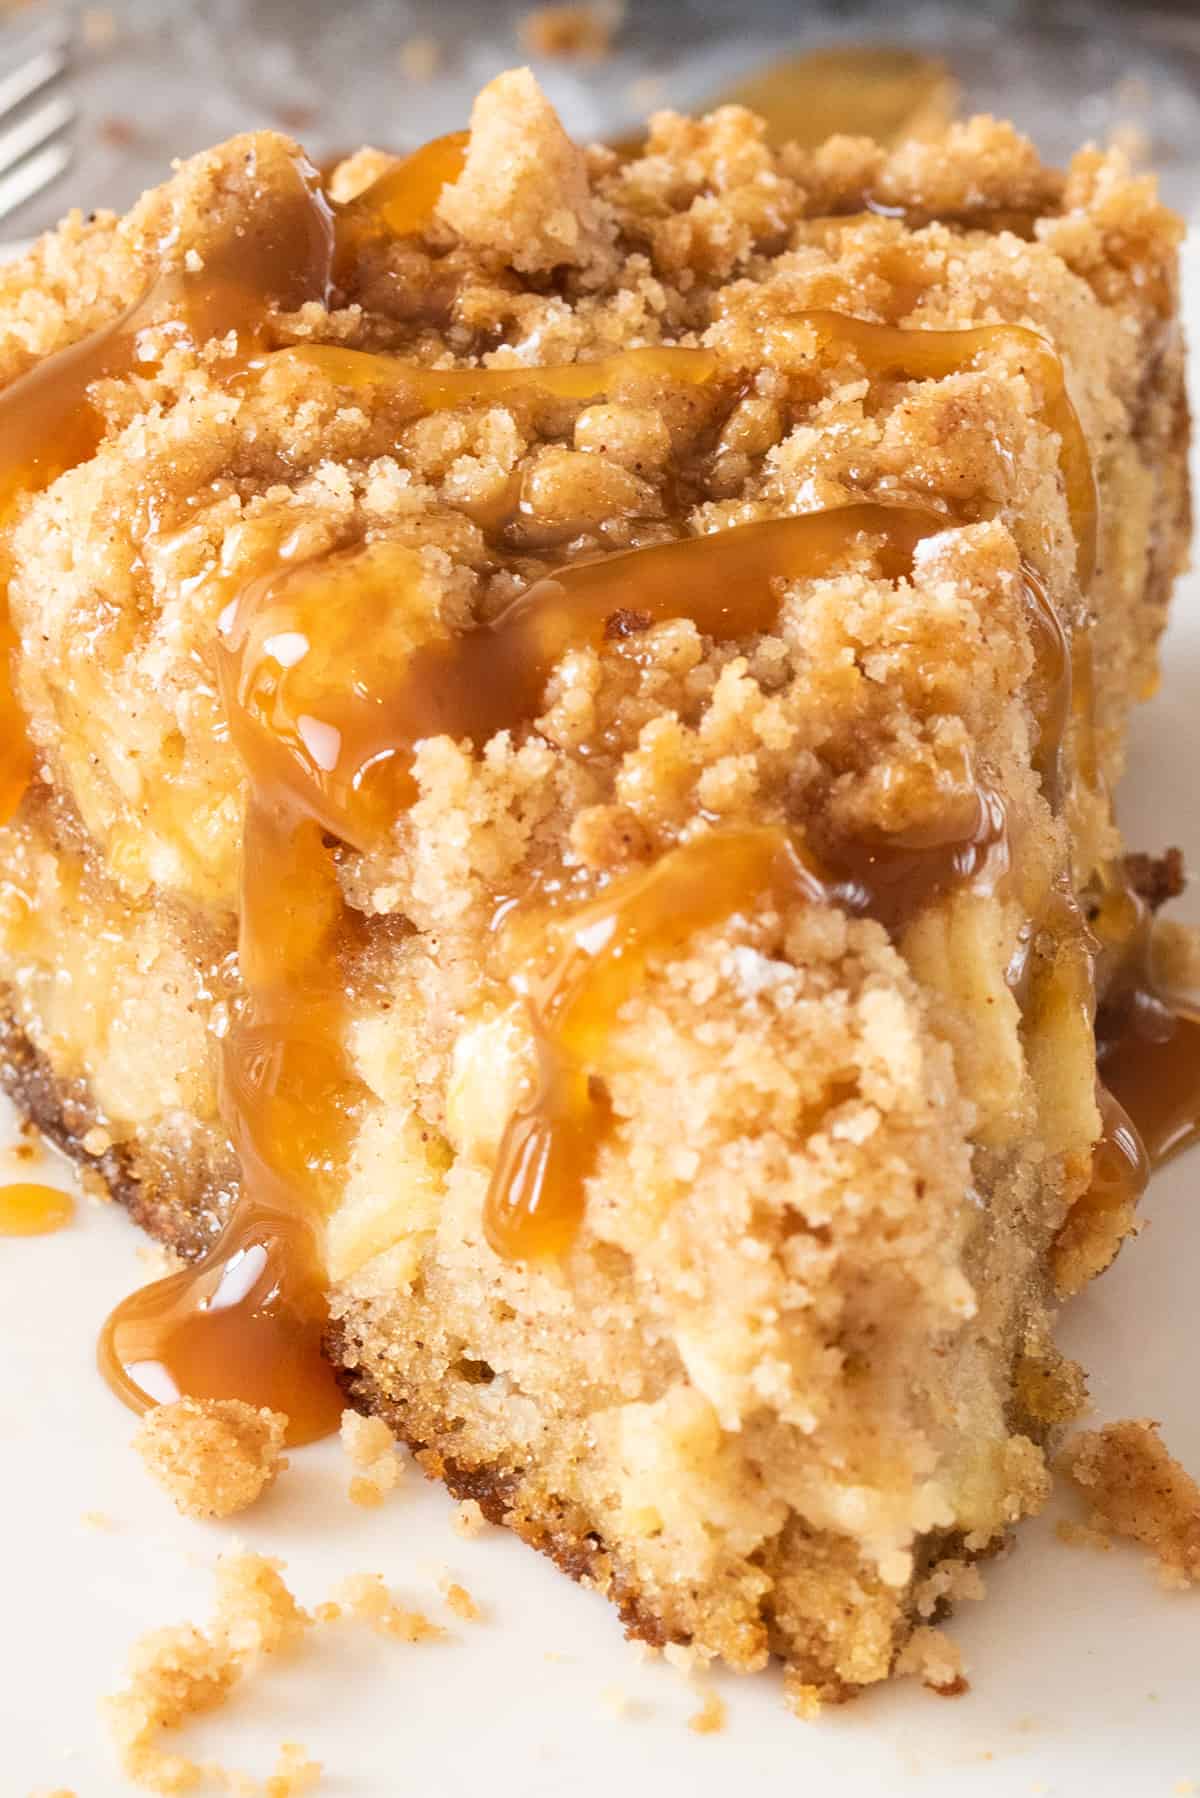 Closeup of Apple Crumb Cake slice with caramel drizzle.